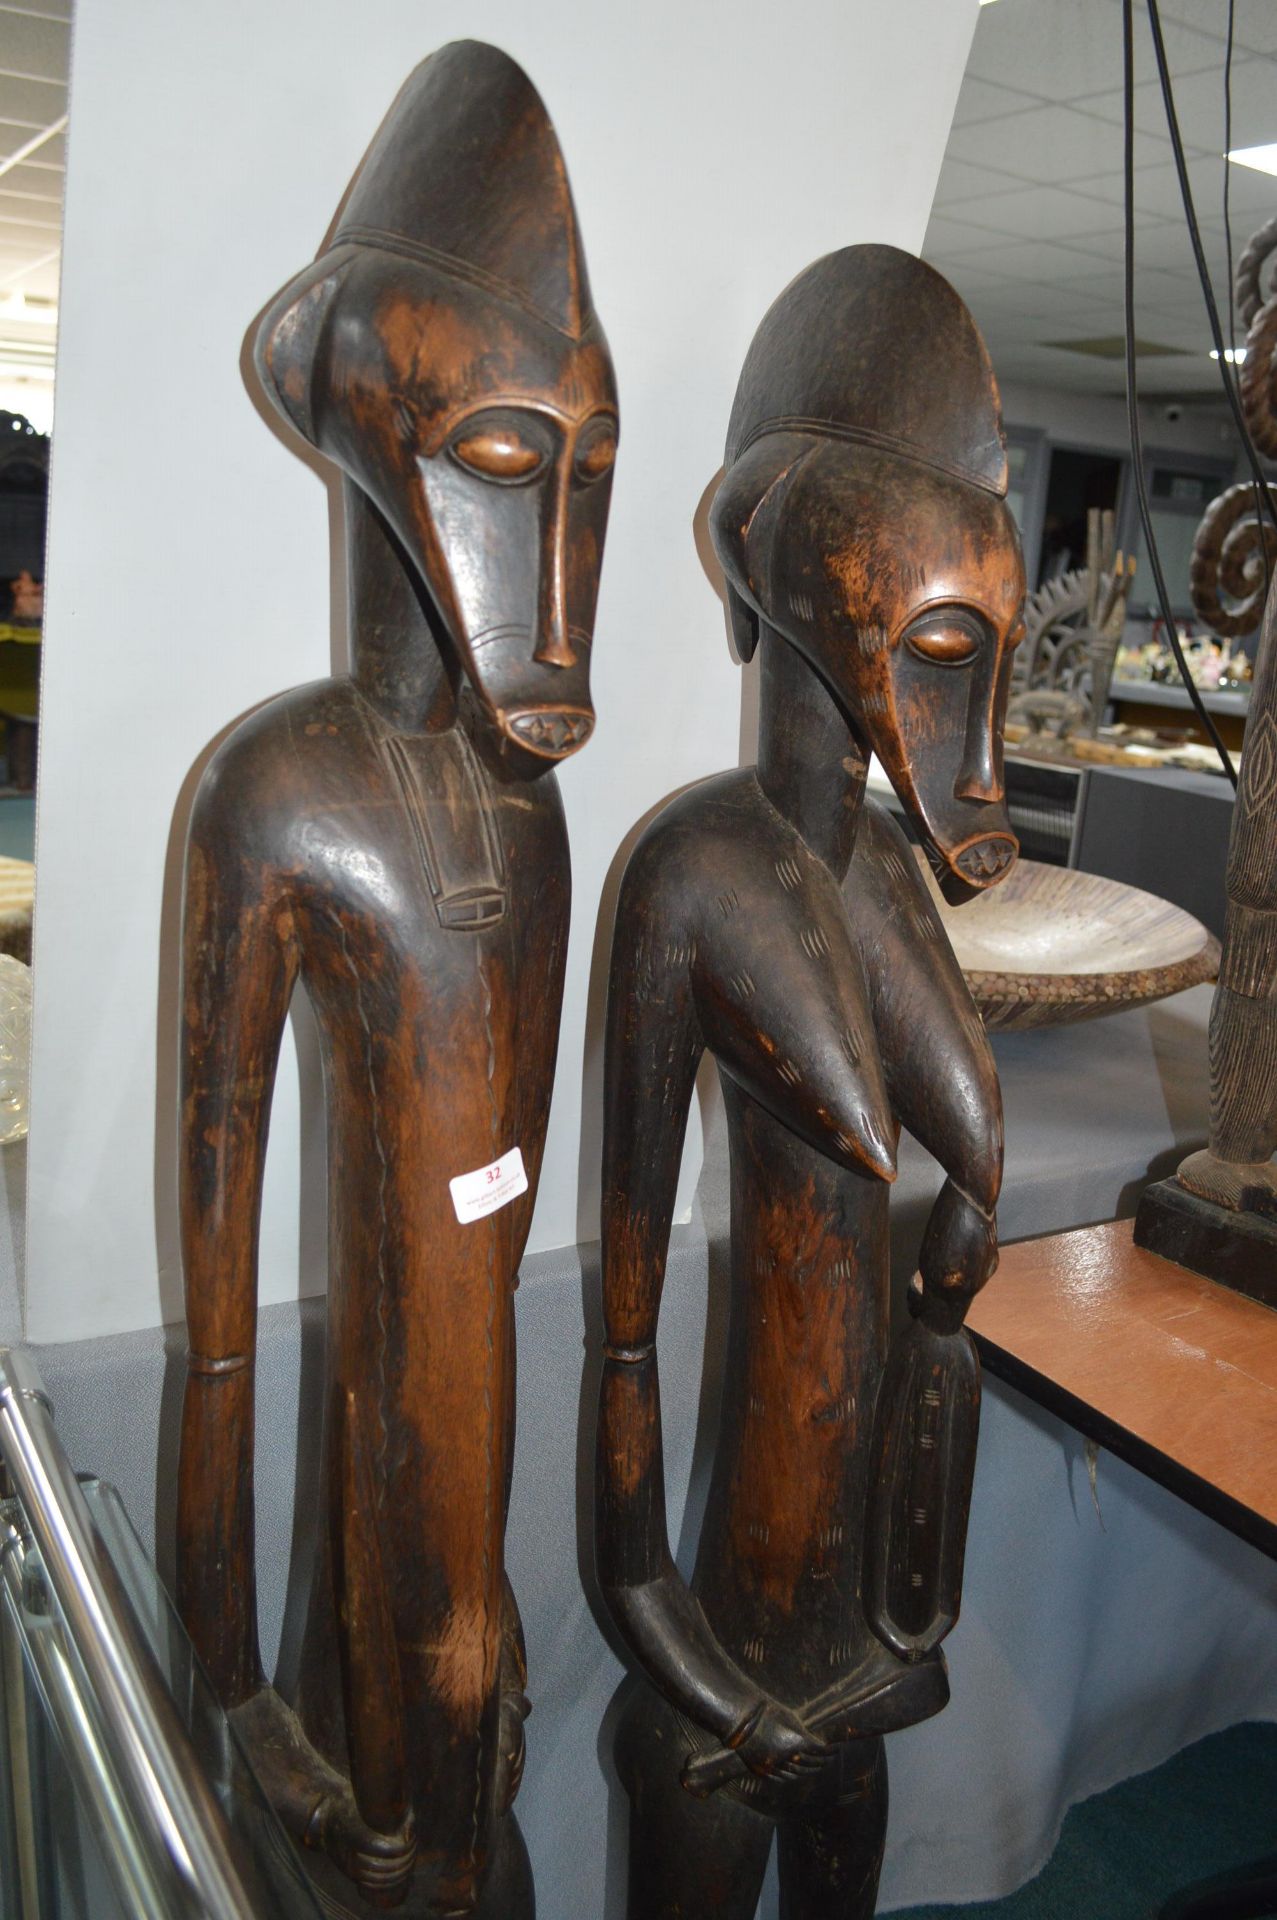 Pair of Large Senufo Fertility Figures 140cm tall - Image 4 of 4